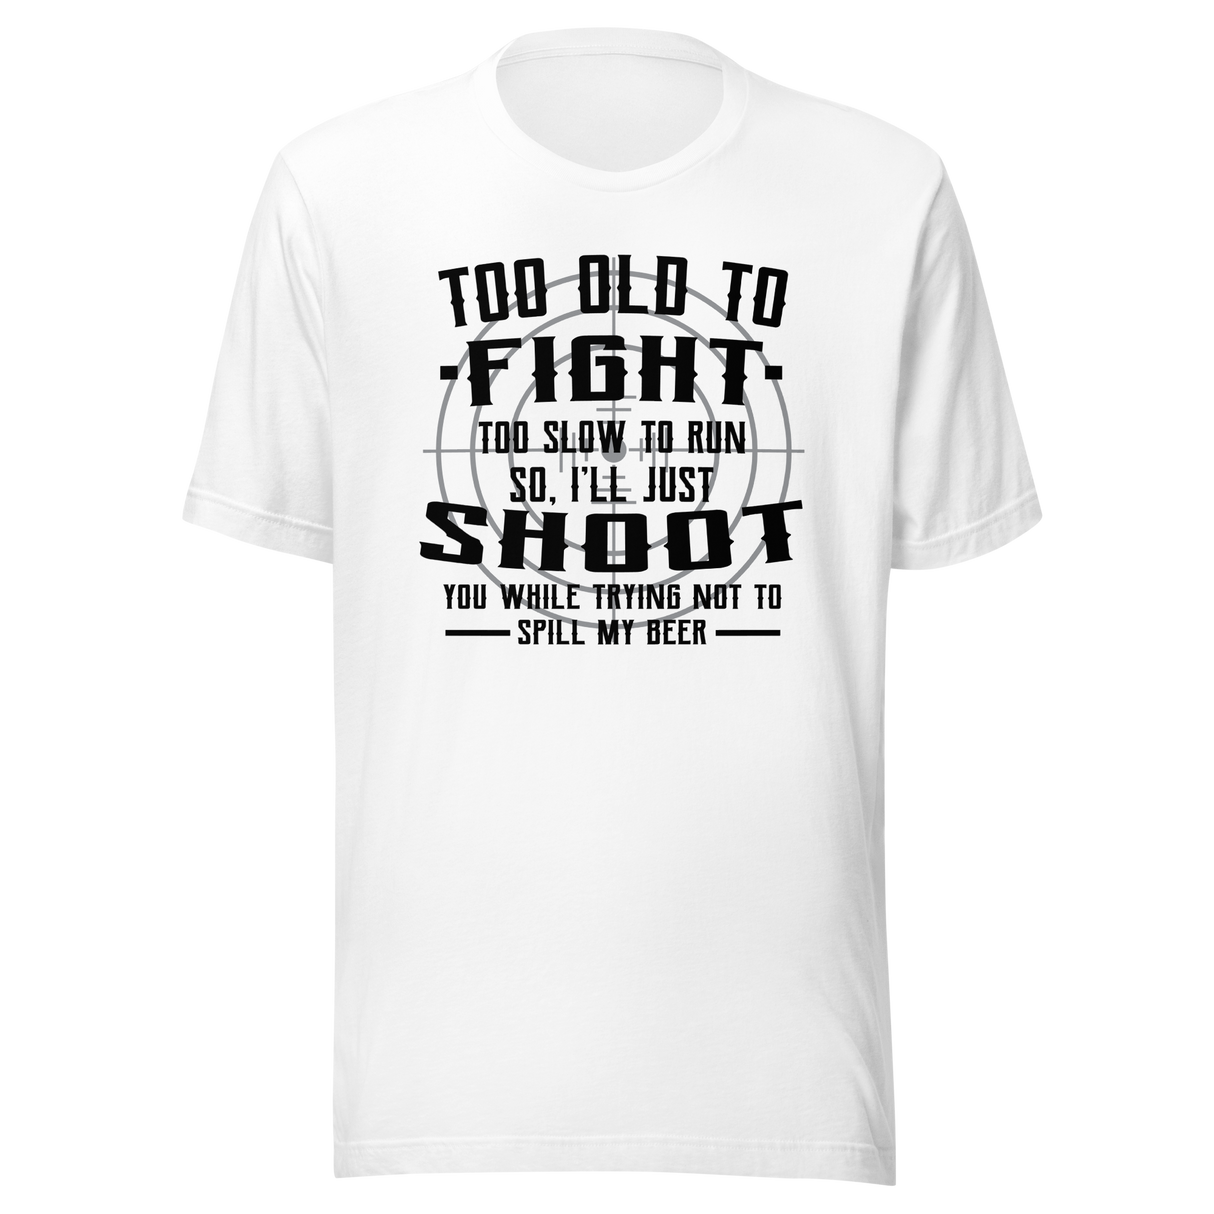 too-old-to-fight-too-slow-to-run-humor-tee-aging-t-shirt-playful-tee-t-shirt-tee#color_white